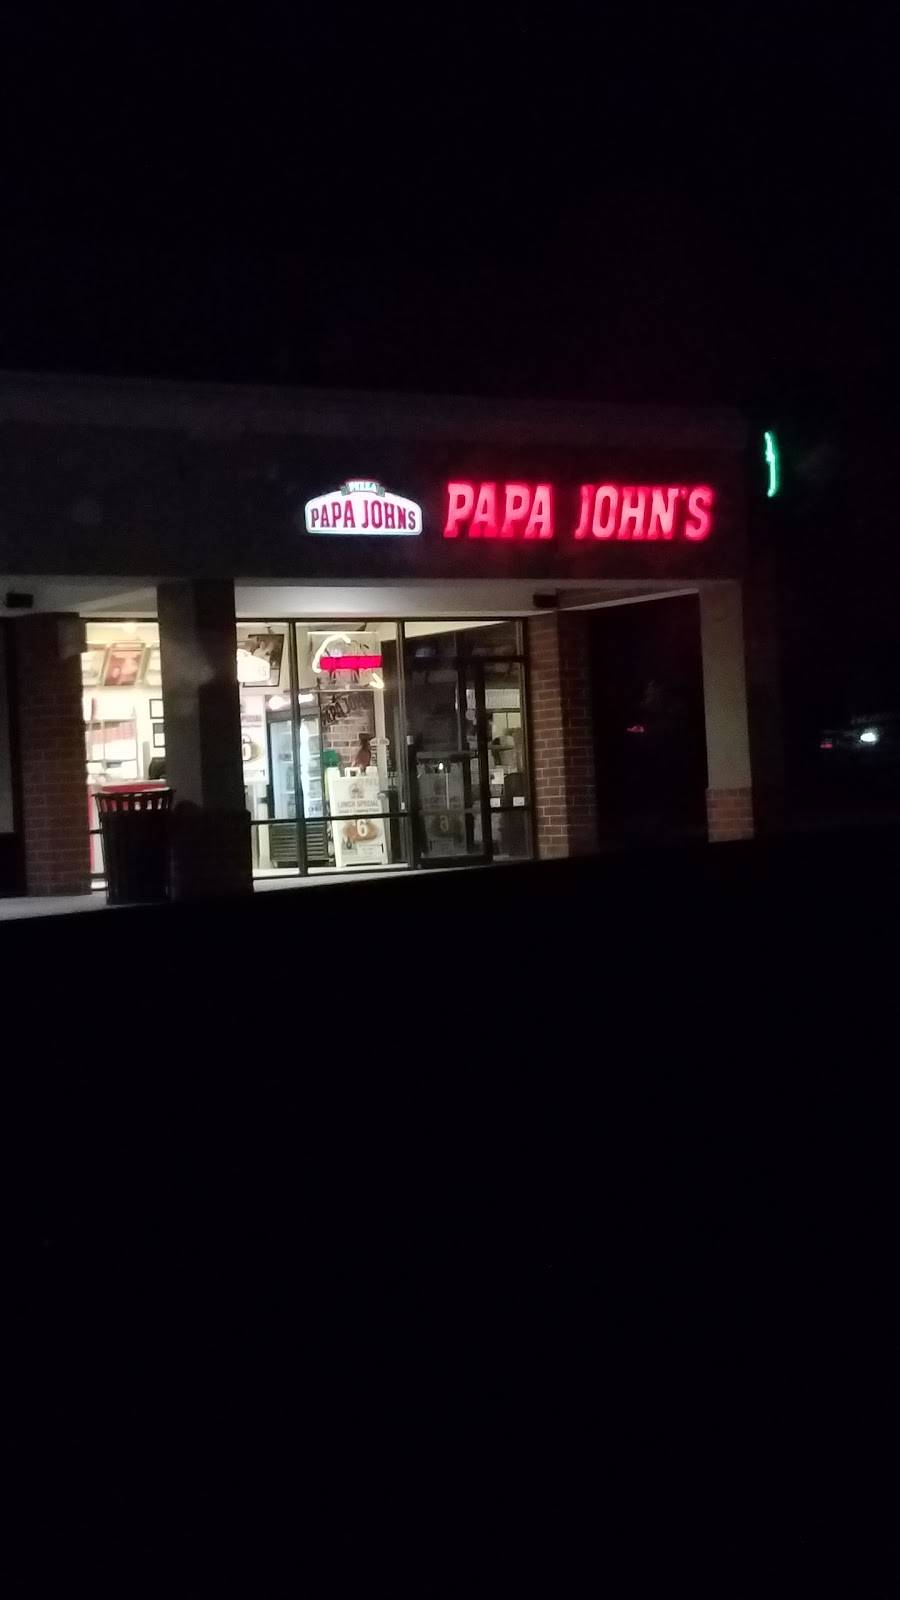 Papa Johns Pizza | restaurant | 1156 Smallwood Dr, St Charles, MD 20601, USA | 3018852307 OR +1 301-885-2307